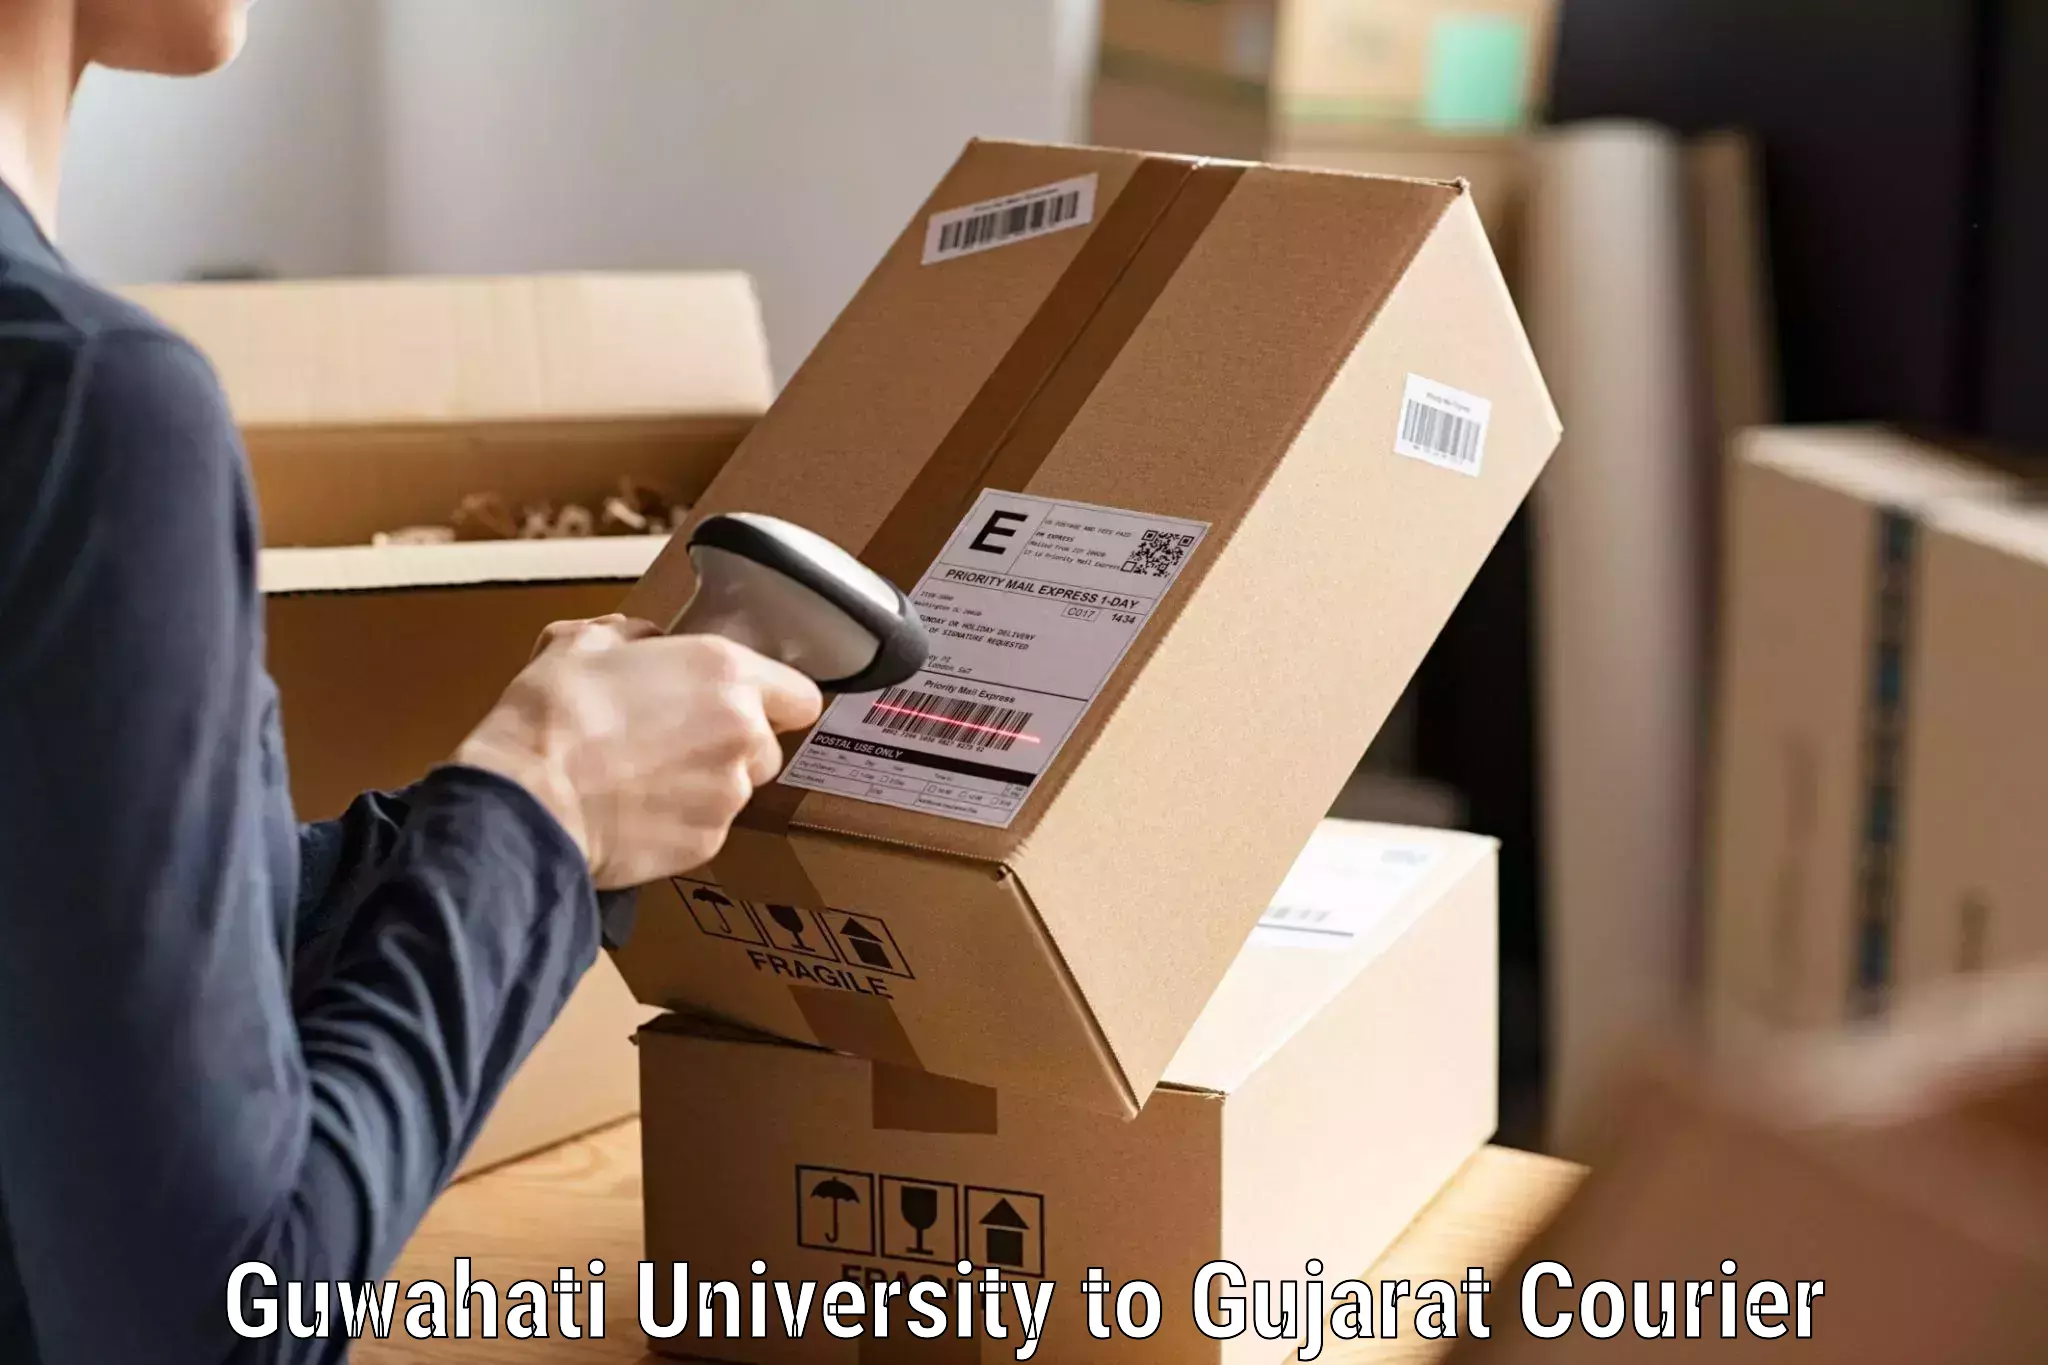 Dynamic courier services Guwahati University to NIT Surat